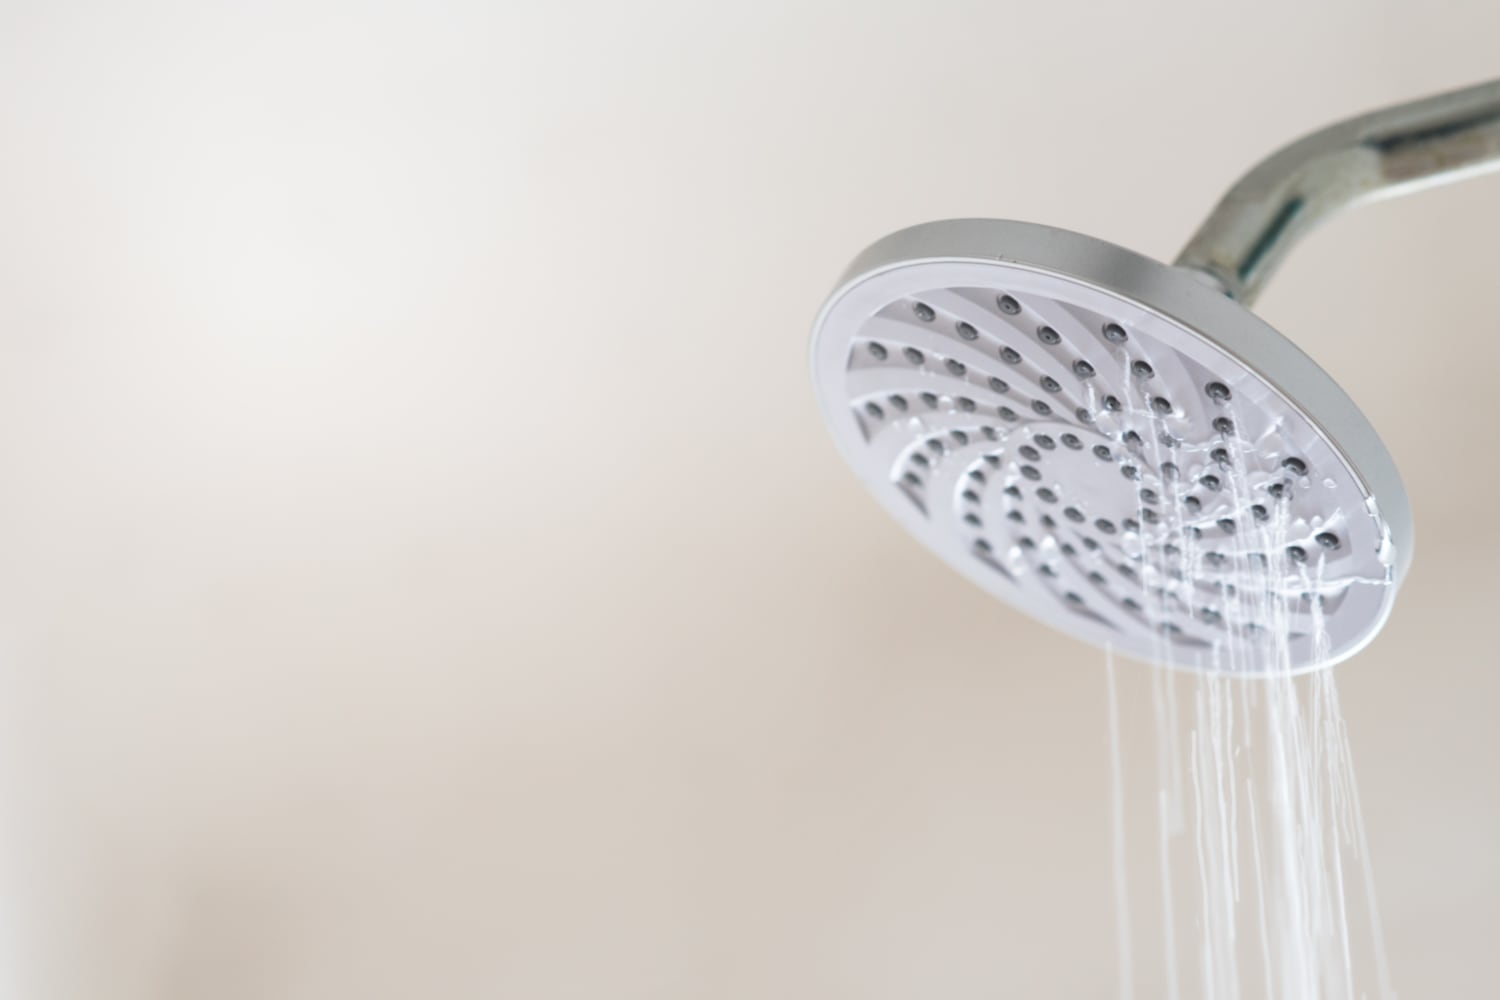 water slowing coming out of a shower head